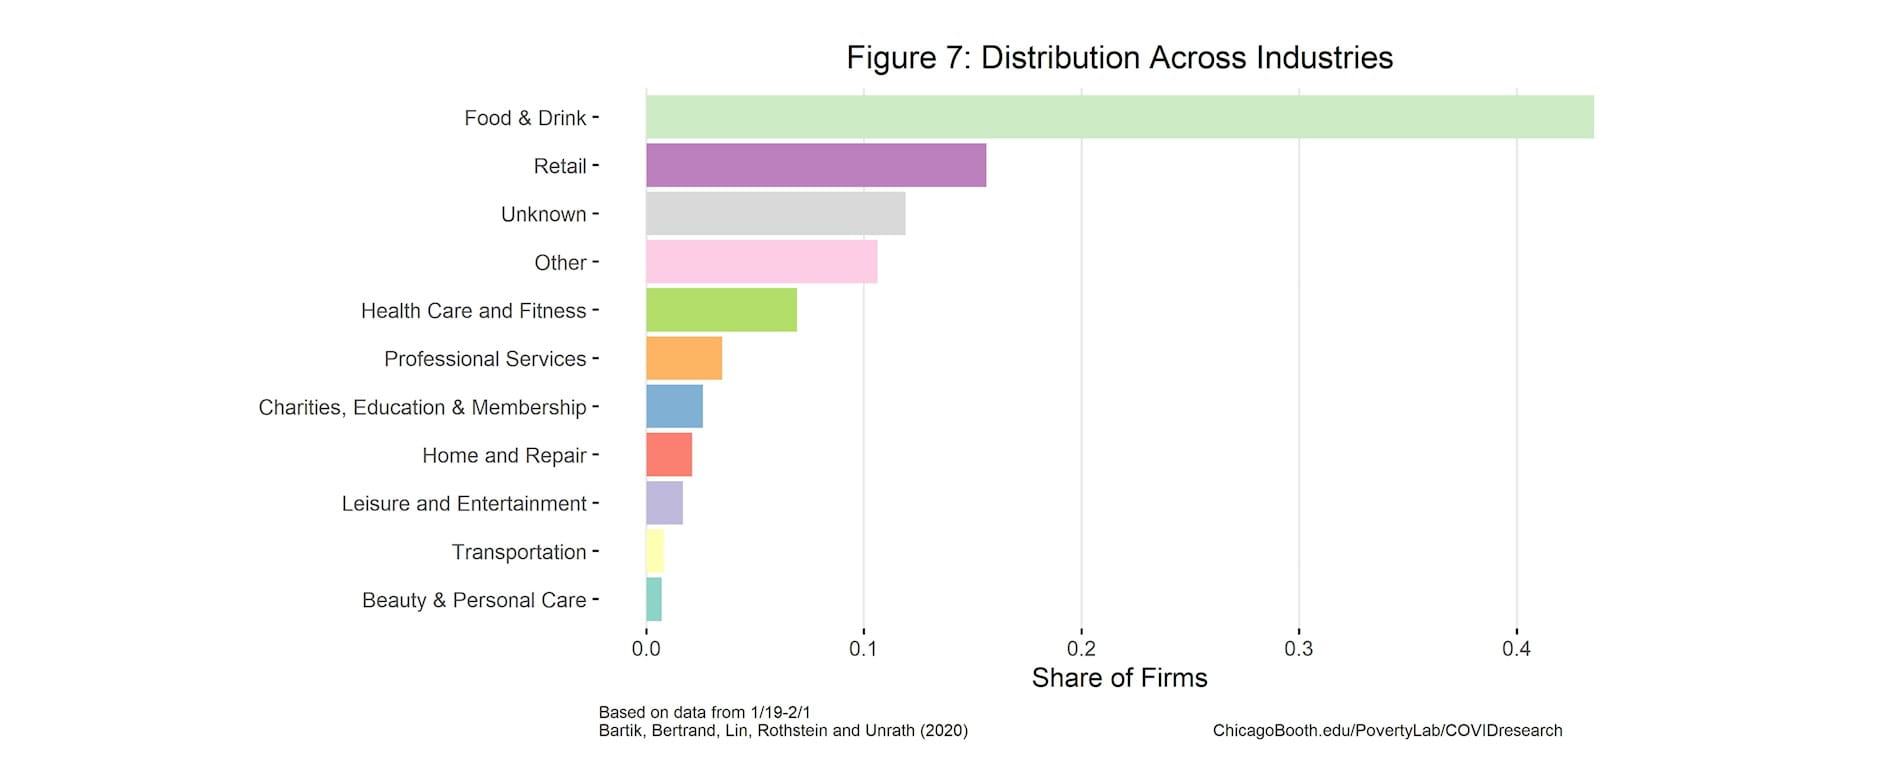 Figure 7: a majority of Homebase firms are in the food and drink or retail industries